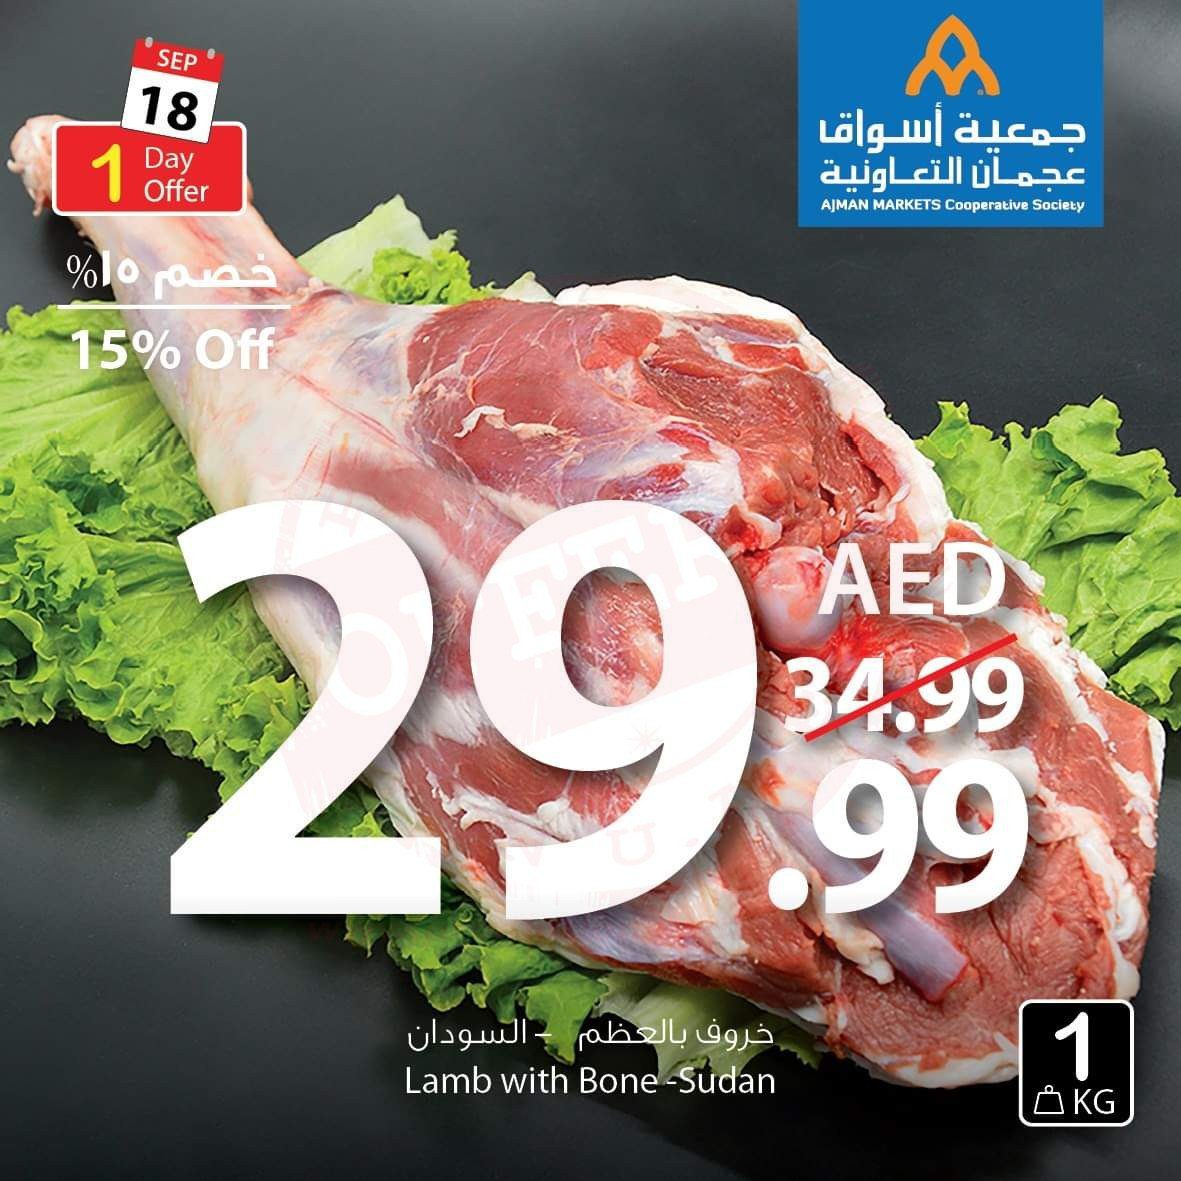 FB IMG 1568800300445 Amazing "One Day" Offer!! Ajman Coop